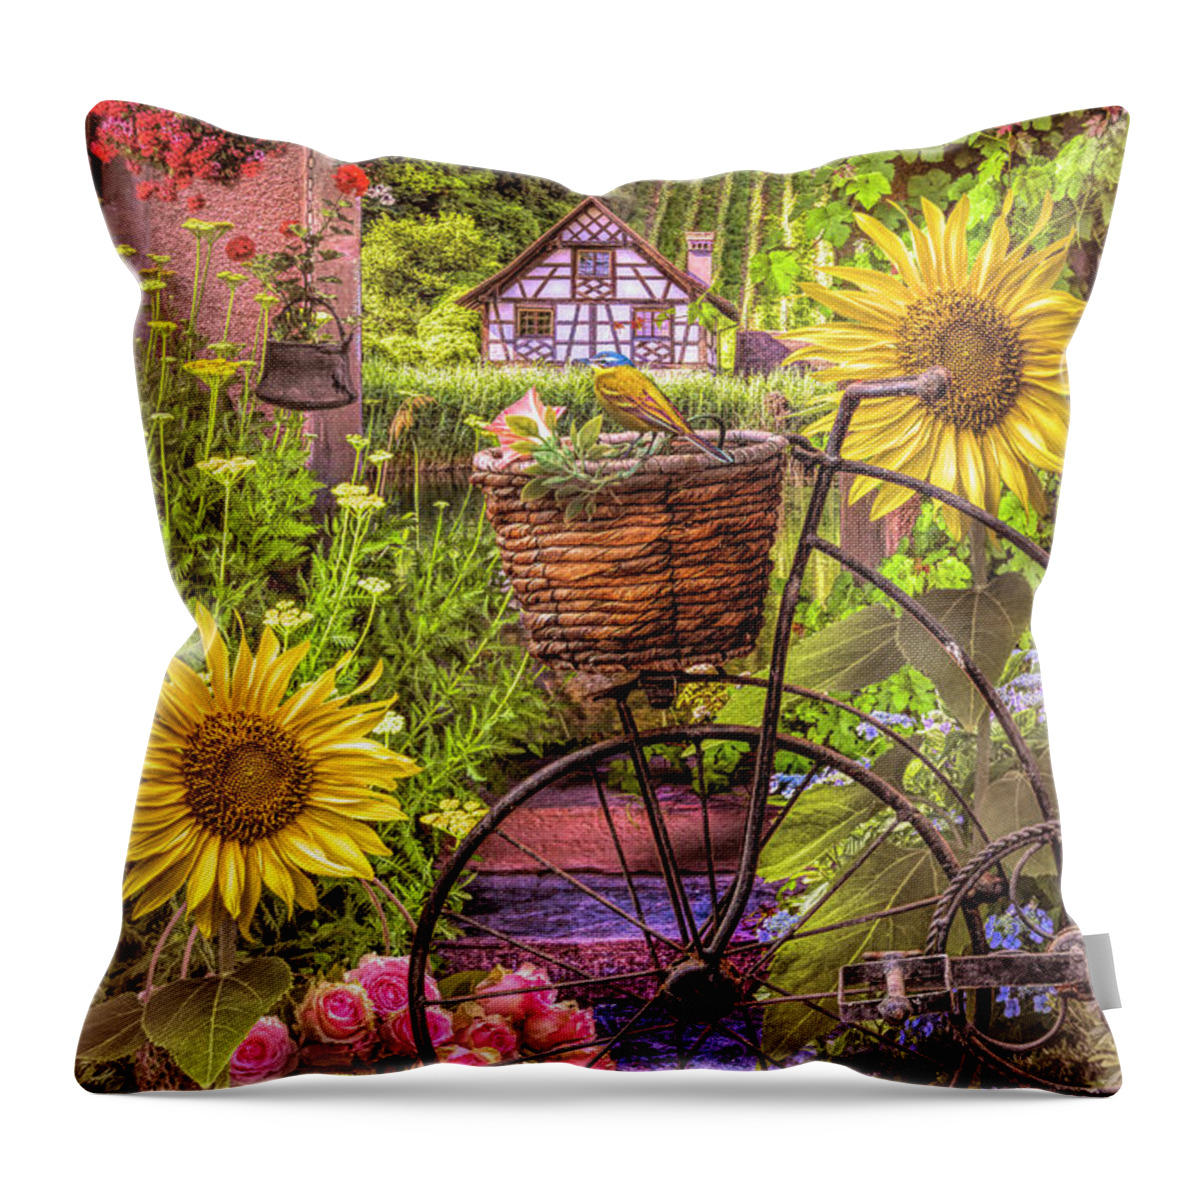 Barns Throw Pillow featuring the photograph Country Garden Wonderland by Debra and Dave Vanderlaan